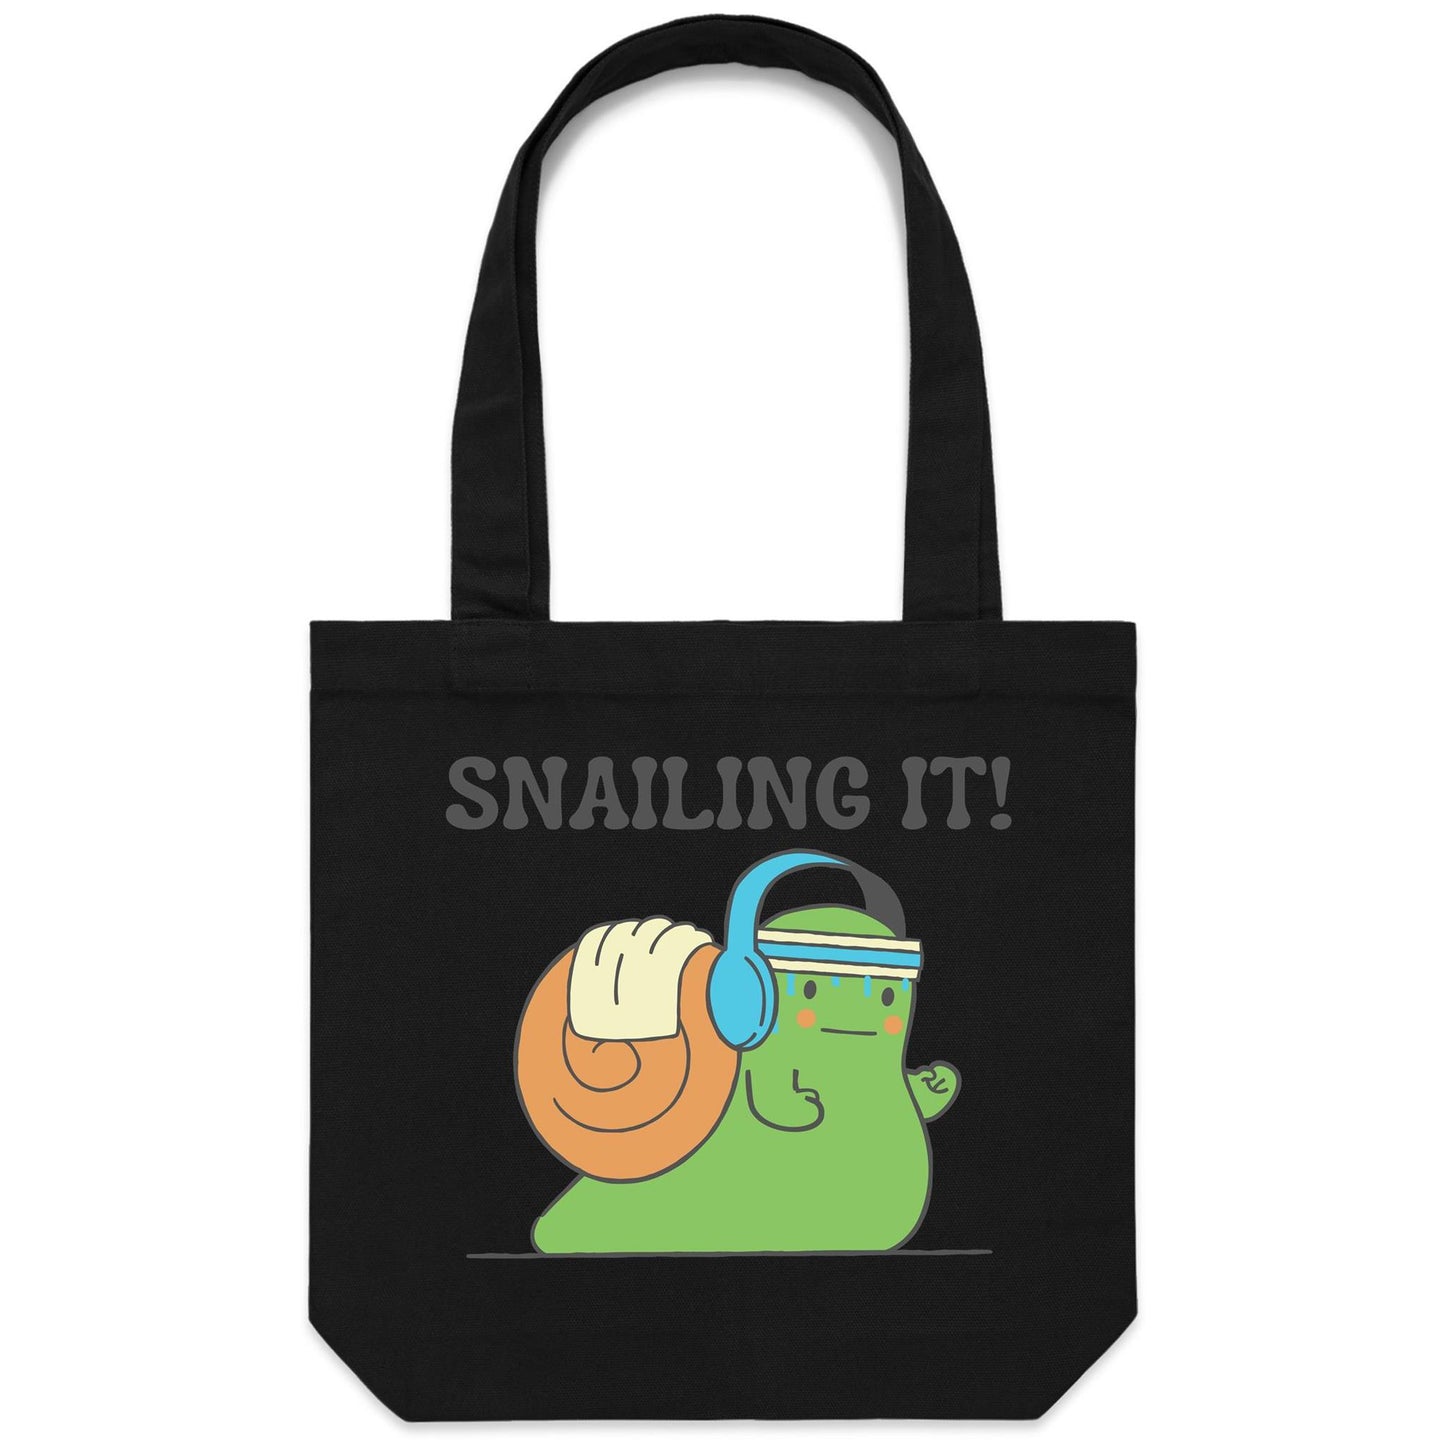 Snailing It - Canvas Tote Bag Black One Size Tote Bag Fitness Funny